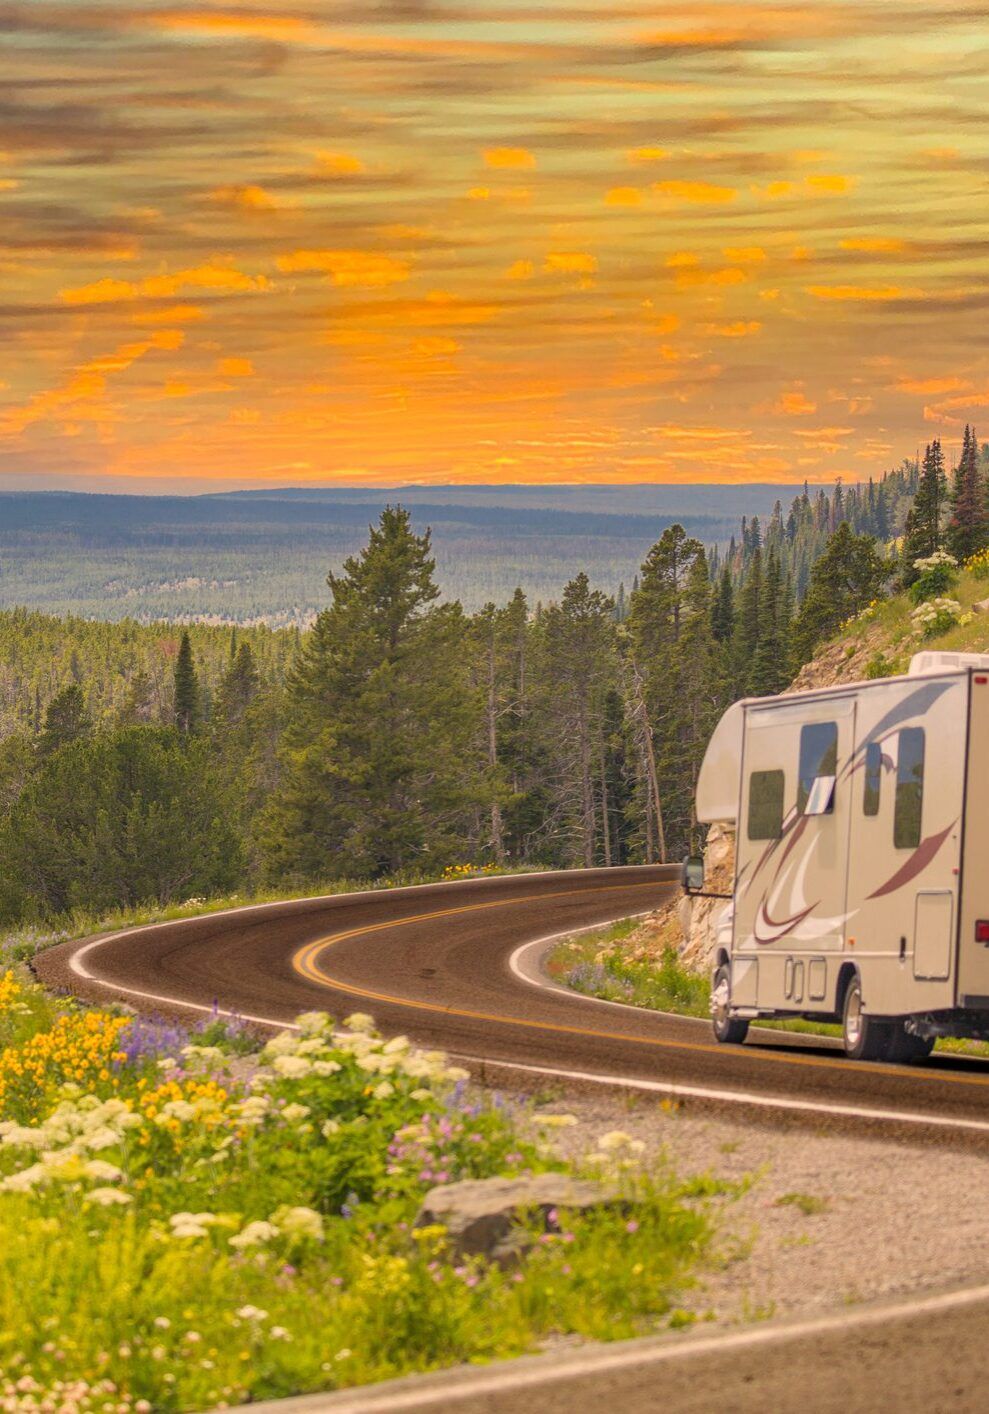 Camper Driving Down Road in The Beautiful Countryside Among Pine Trees and Flowers.